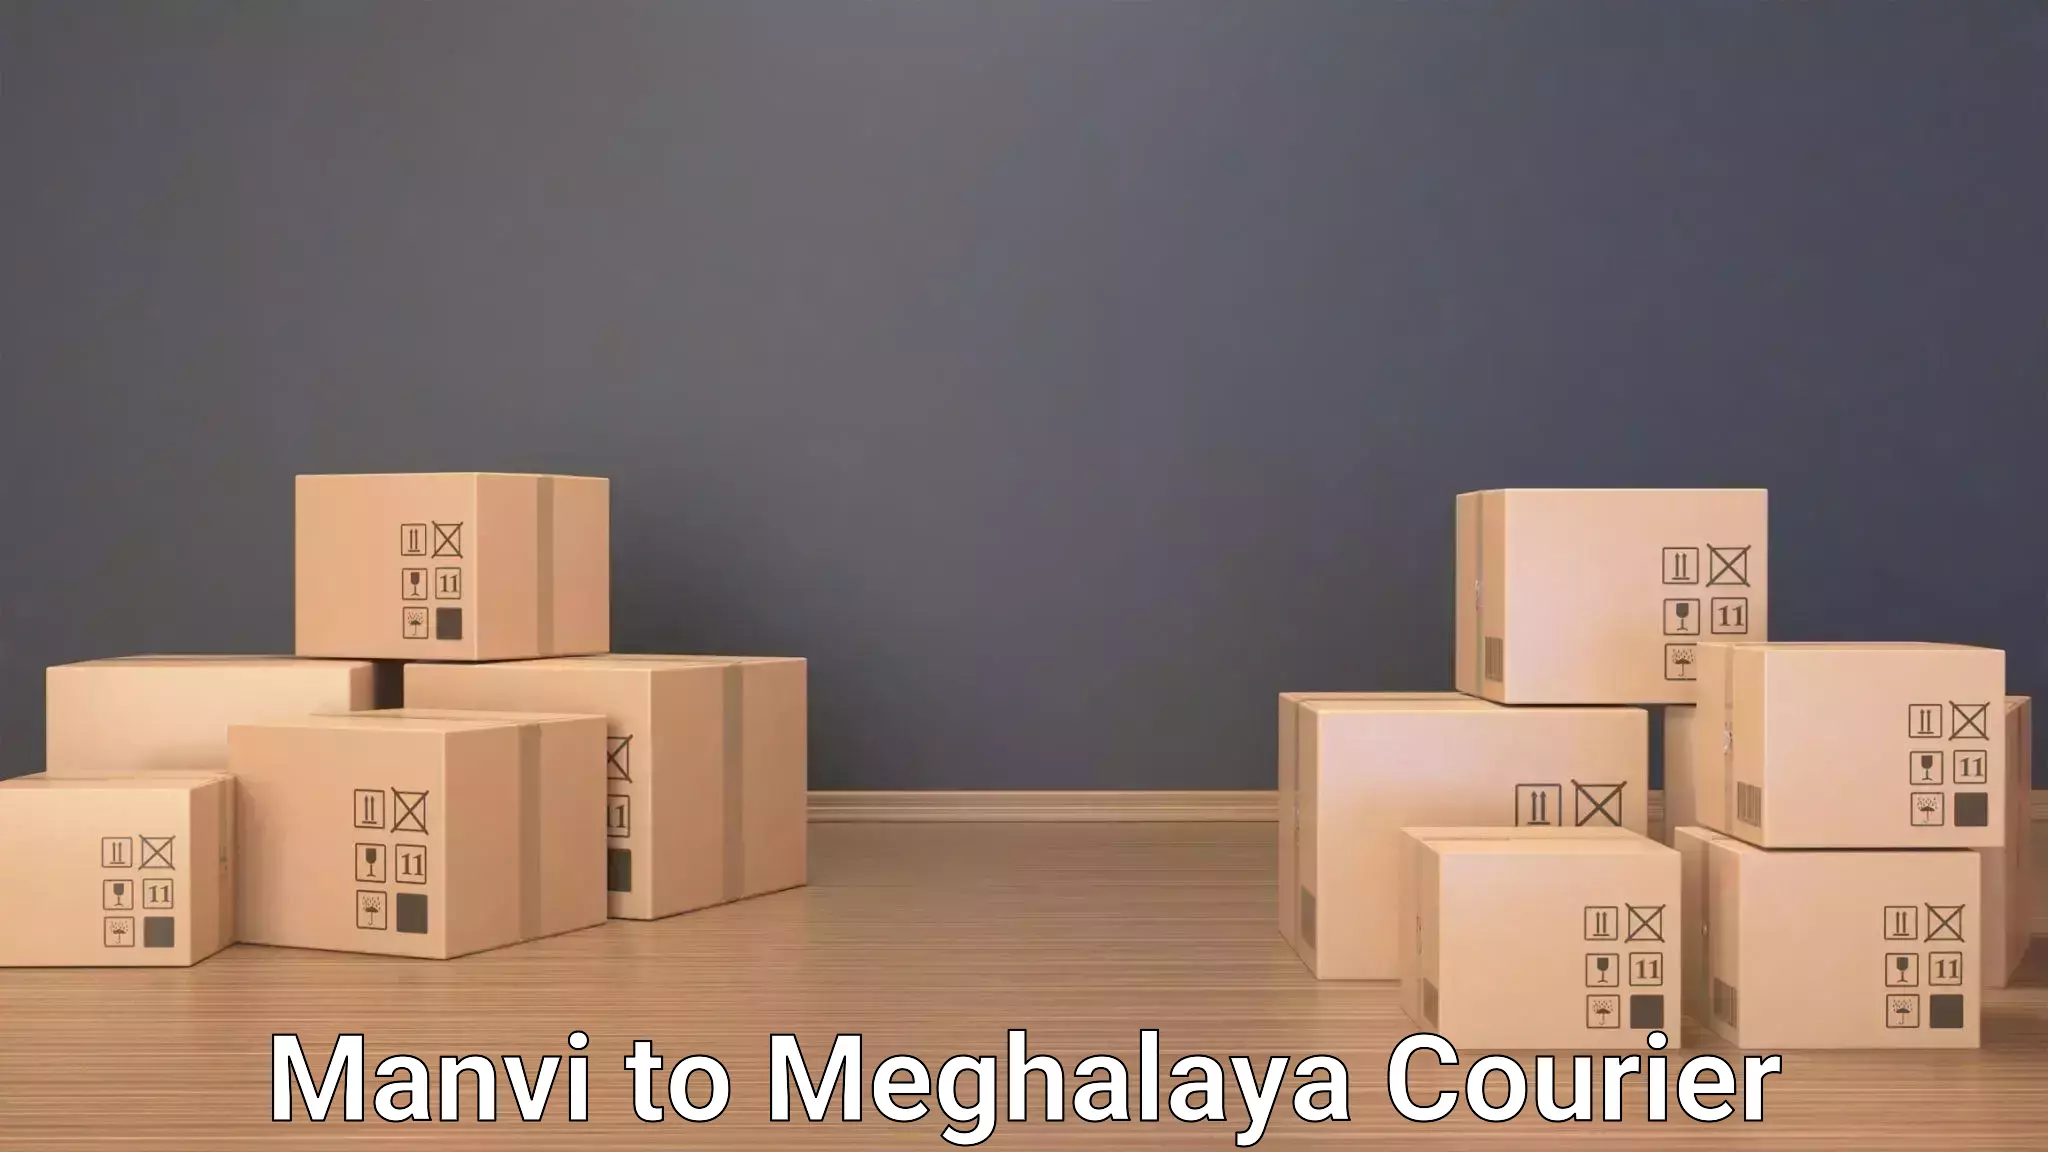 Hassle-free luggage shipping Manvi to Shillong